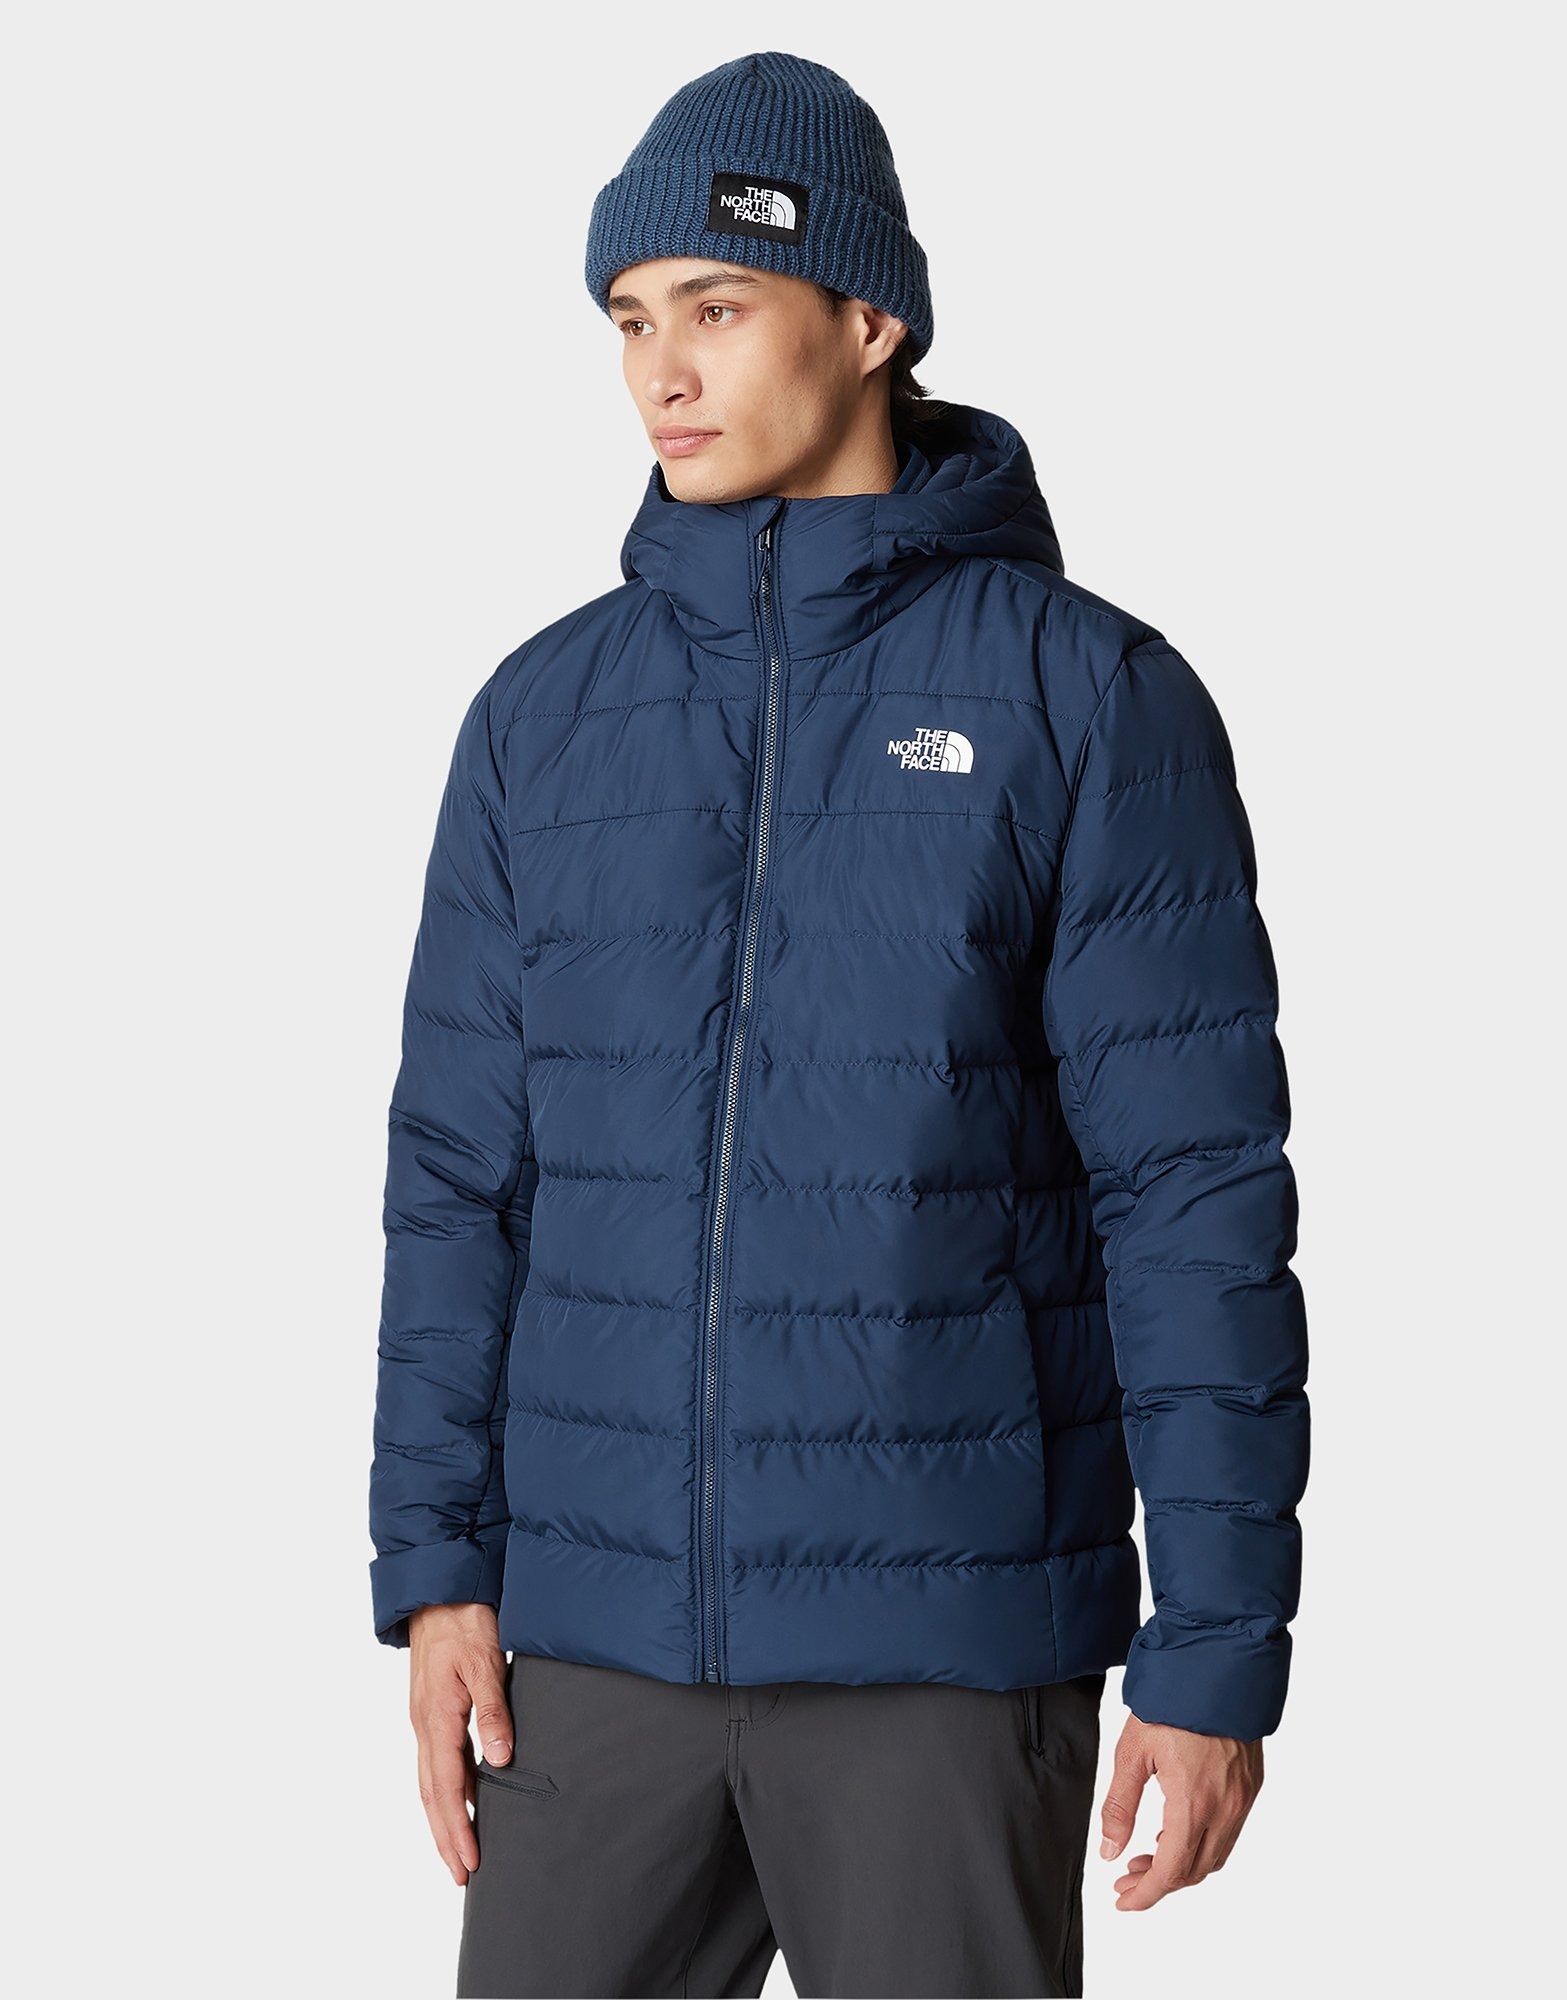 Blue The North Face Aconcagua 3 Hooded Jacket | JD Sports UK